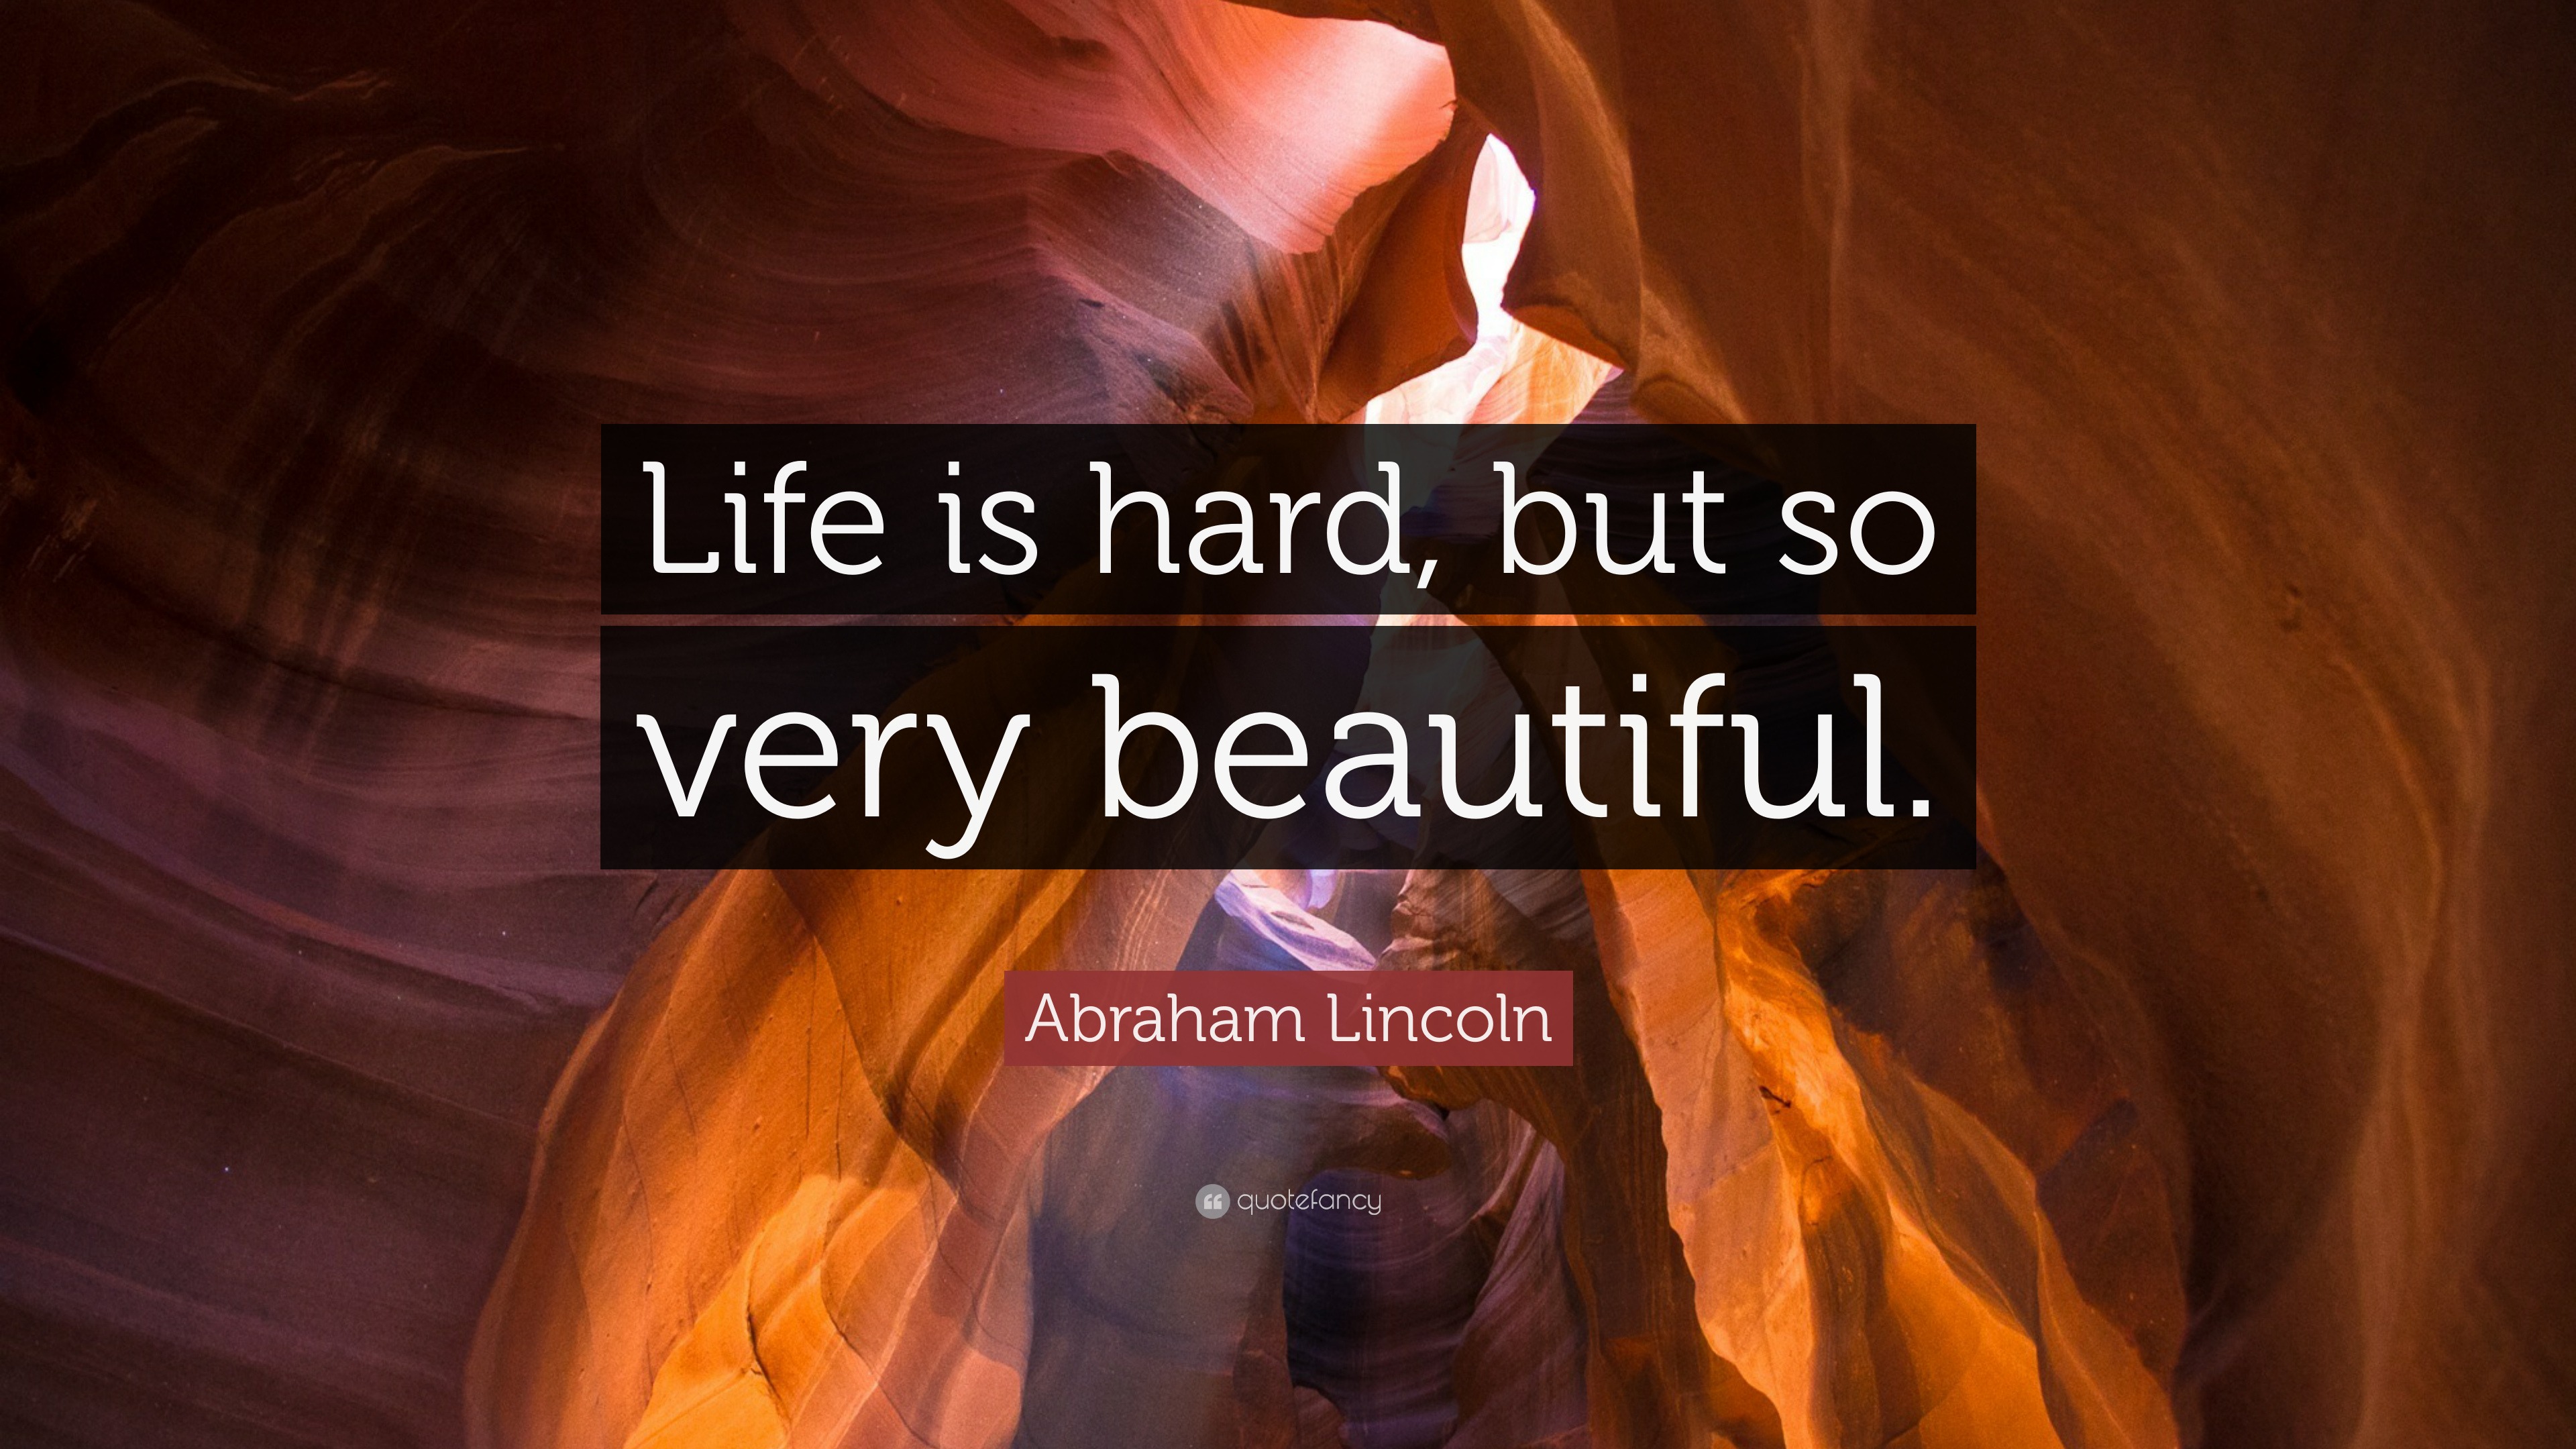 Abraham Lincoln Quote “Life is hard, but so very